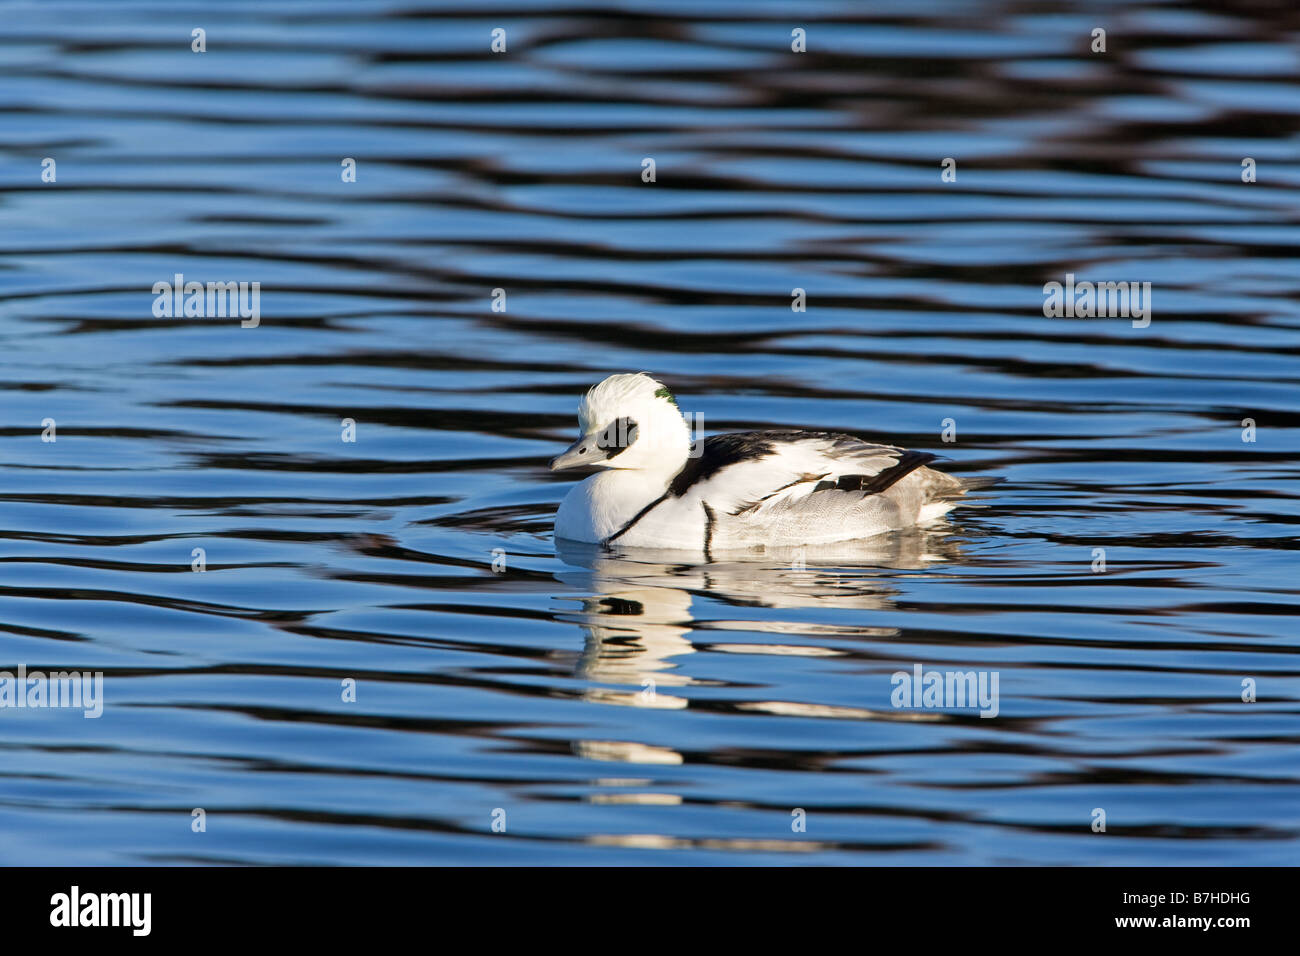 Smew Mergus albellus adult male swimming in blue water with ripples and reflections Stock Photo